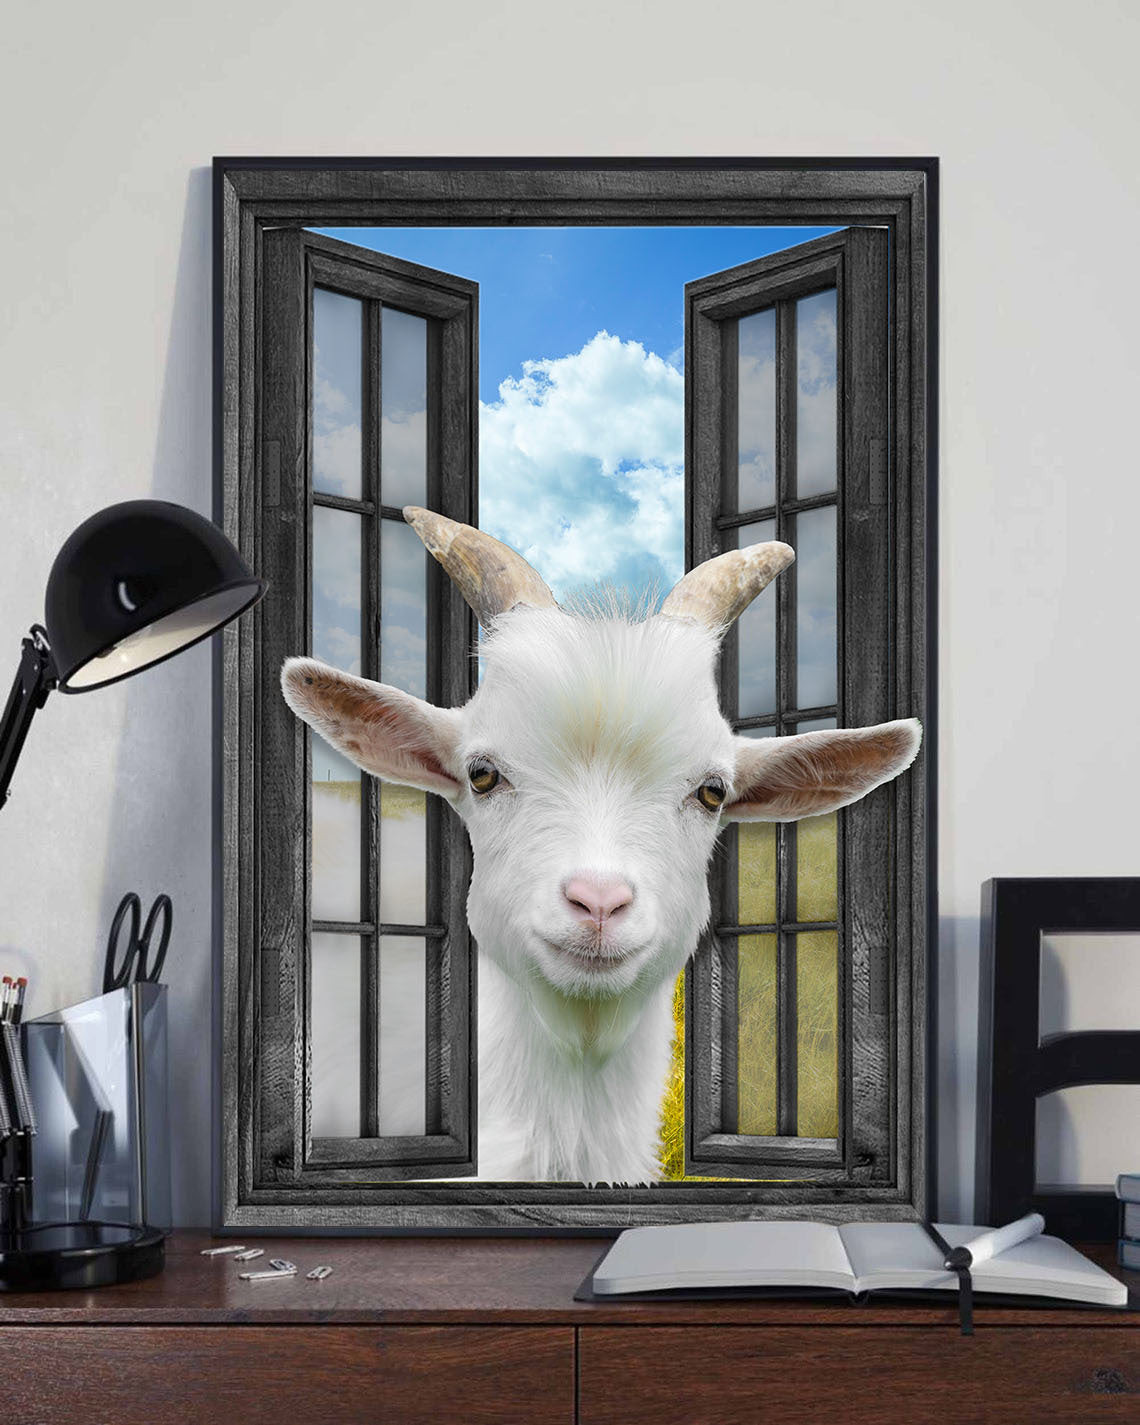 Pygmy Goat 3D Wall Art Painting Prints Home Decor Cattle Lover Landscape Seen Through Window Scene Wall Mural, 3D Window Wall Decal, Window Wall Mural, Window Wall Sticker, Window Sticker Gift Idea 18x30IN